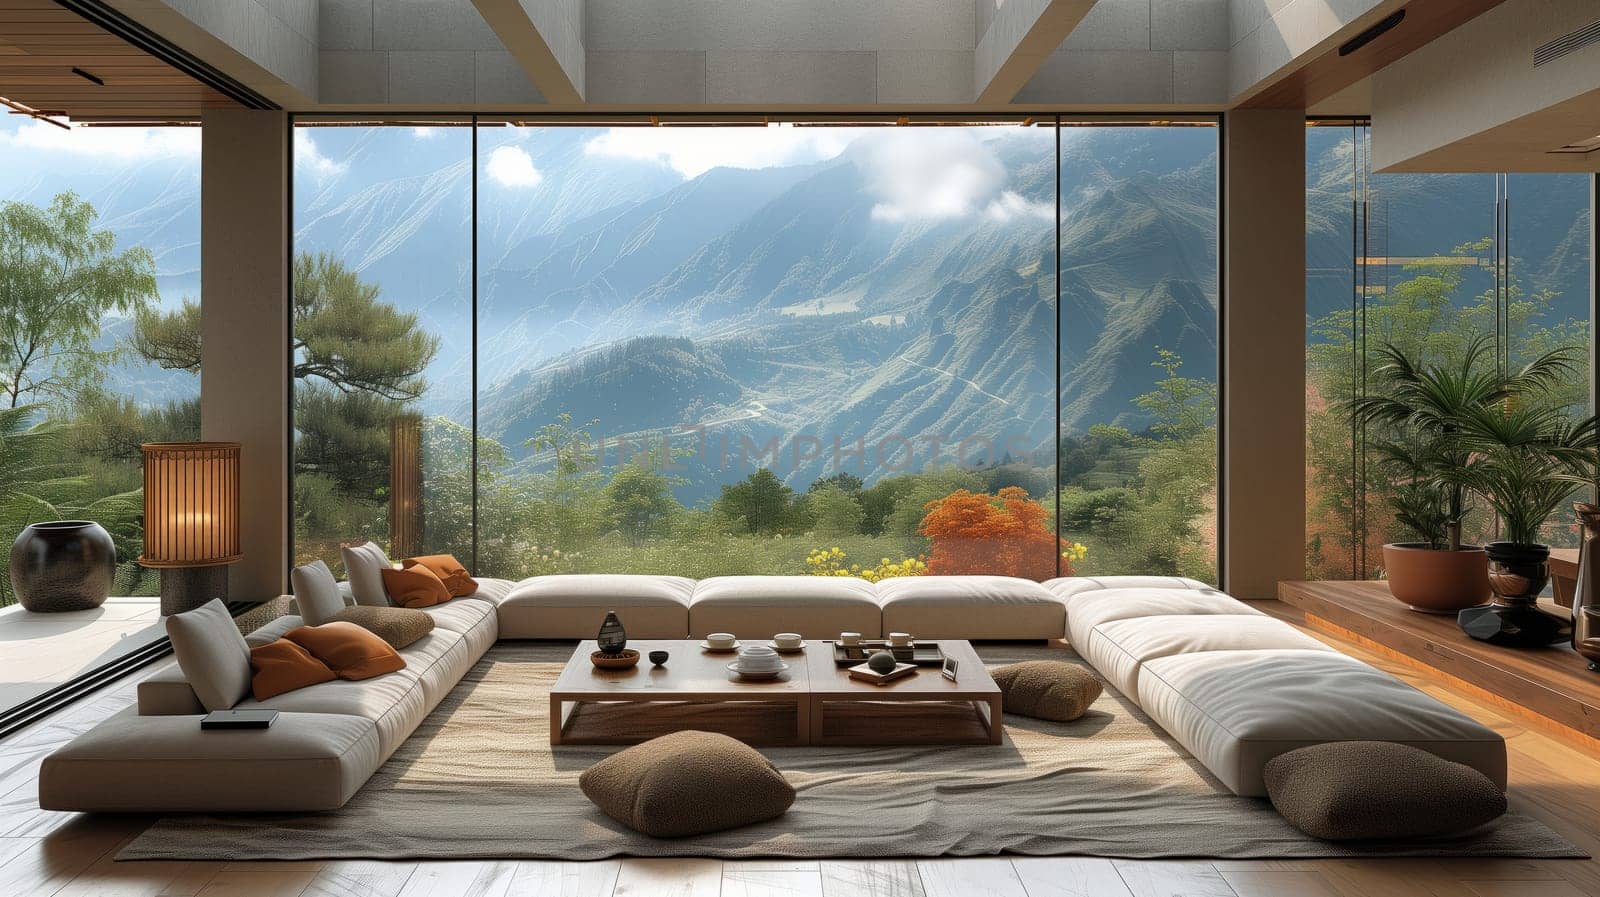 Living room with wood, plantfilled windows, and scenic mountain view by richwolf